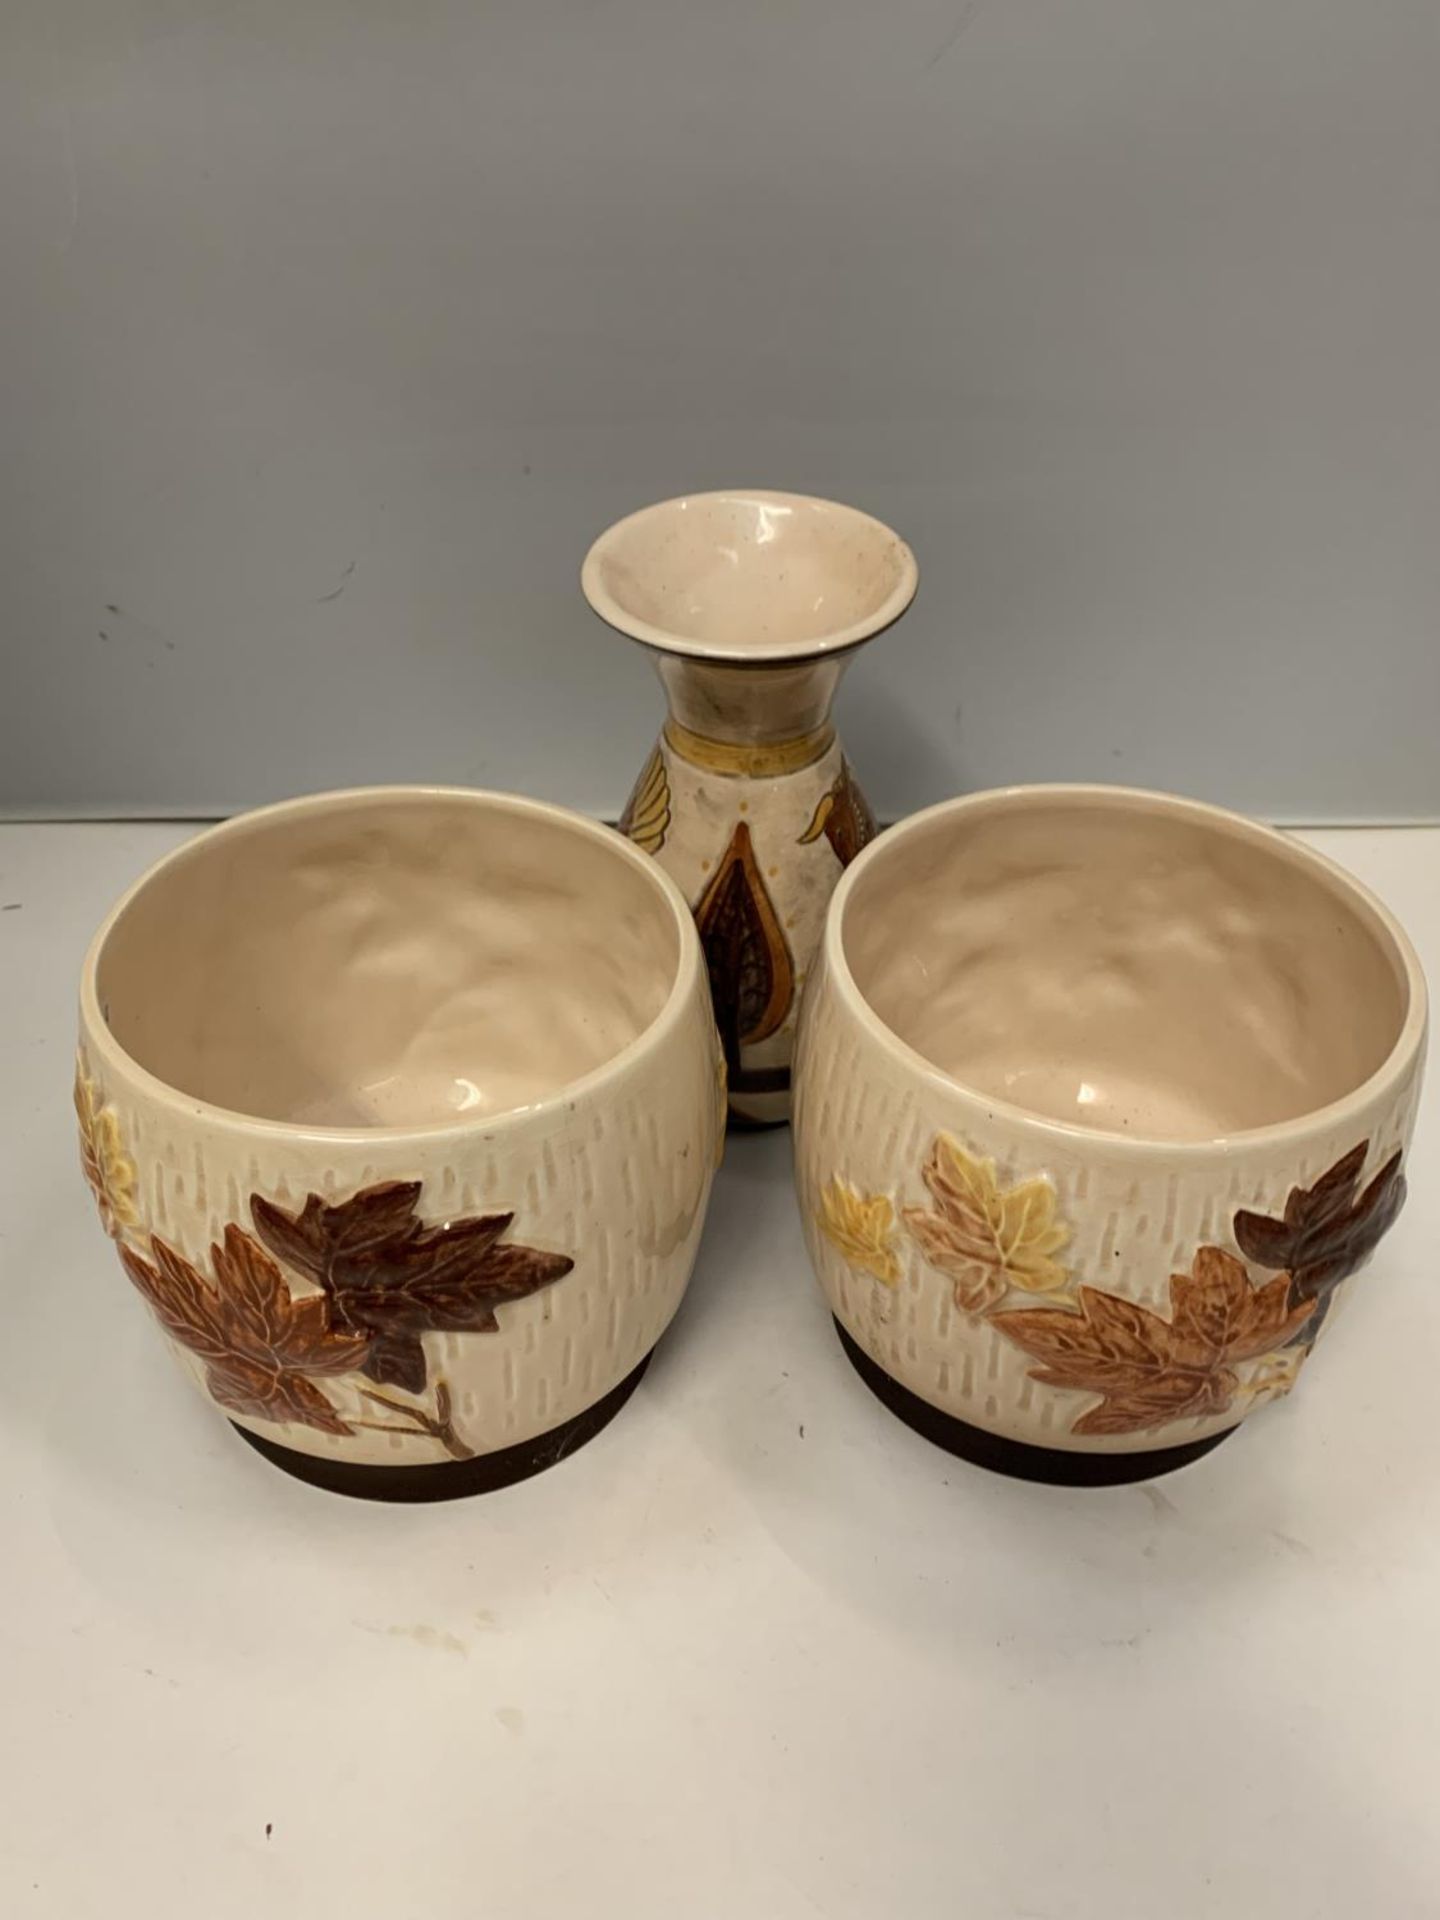 THREE ITEMS OF SYLVAC TO INCLUDE TWO PLANT POTS CREAM WITH LEAF DESIGN AND A VASE